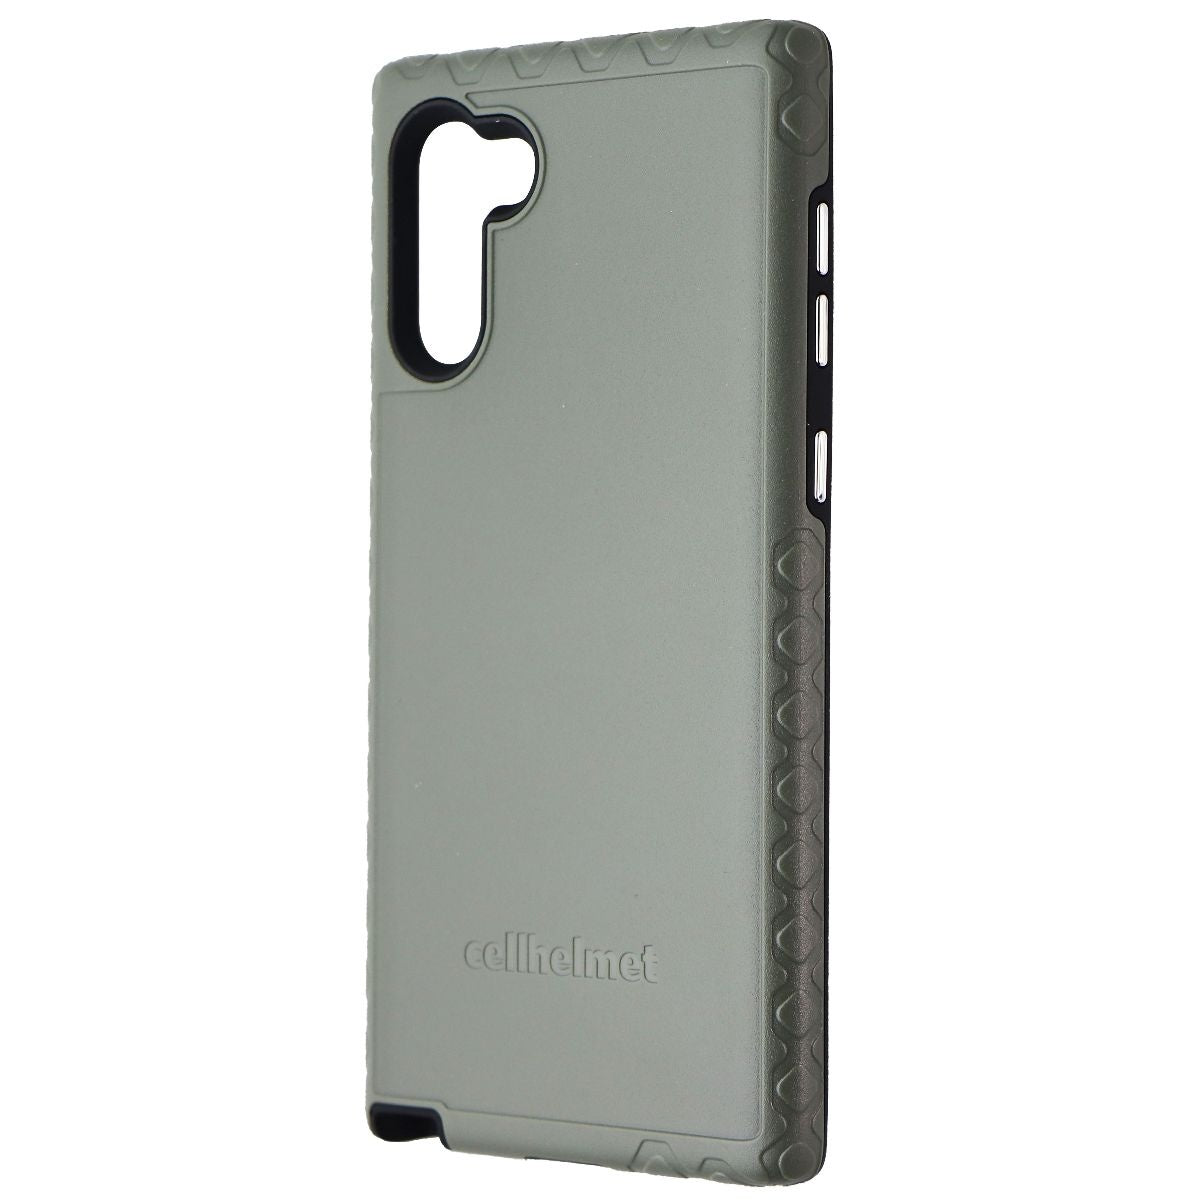 CellHelmet Fortitude Hard Case for Samsung Galaxy Note10 - Olive Drab Green Cell Phone - Cases, Covers & Skins CellHelmet    - Simple Cell Bulk Wholesale Pricing - USA Seller